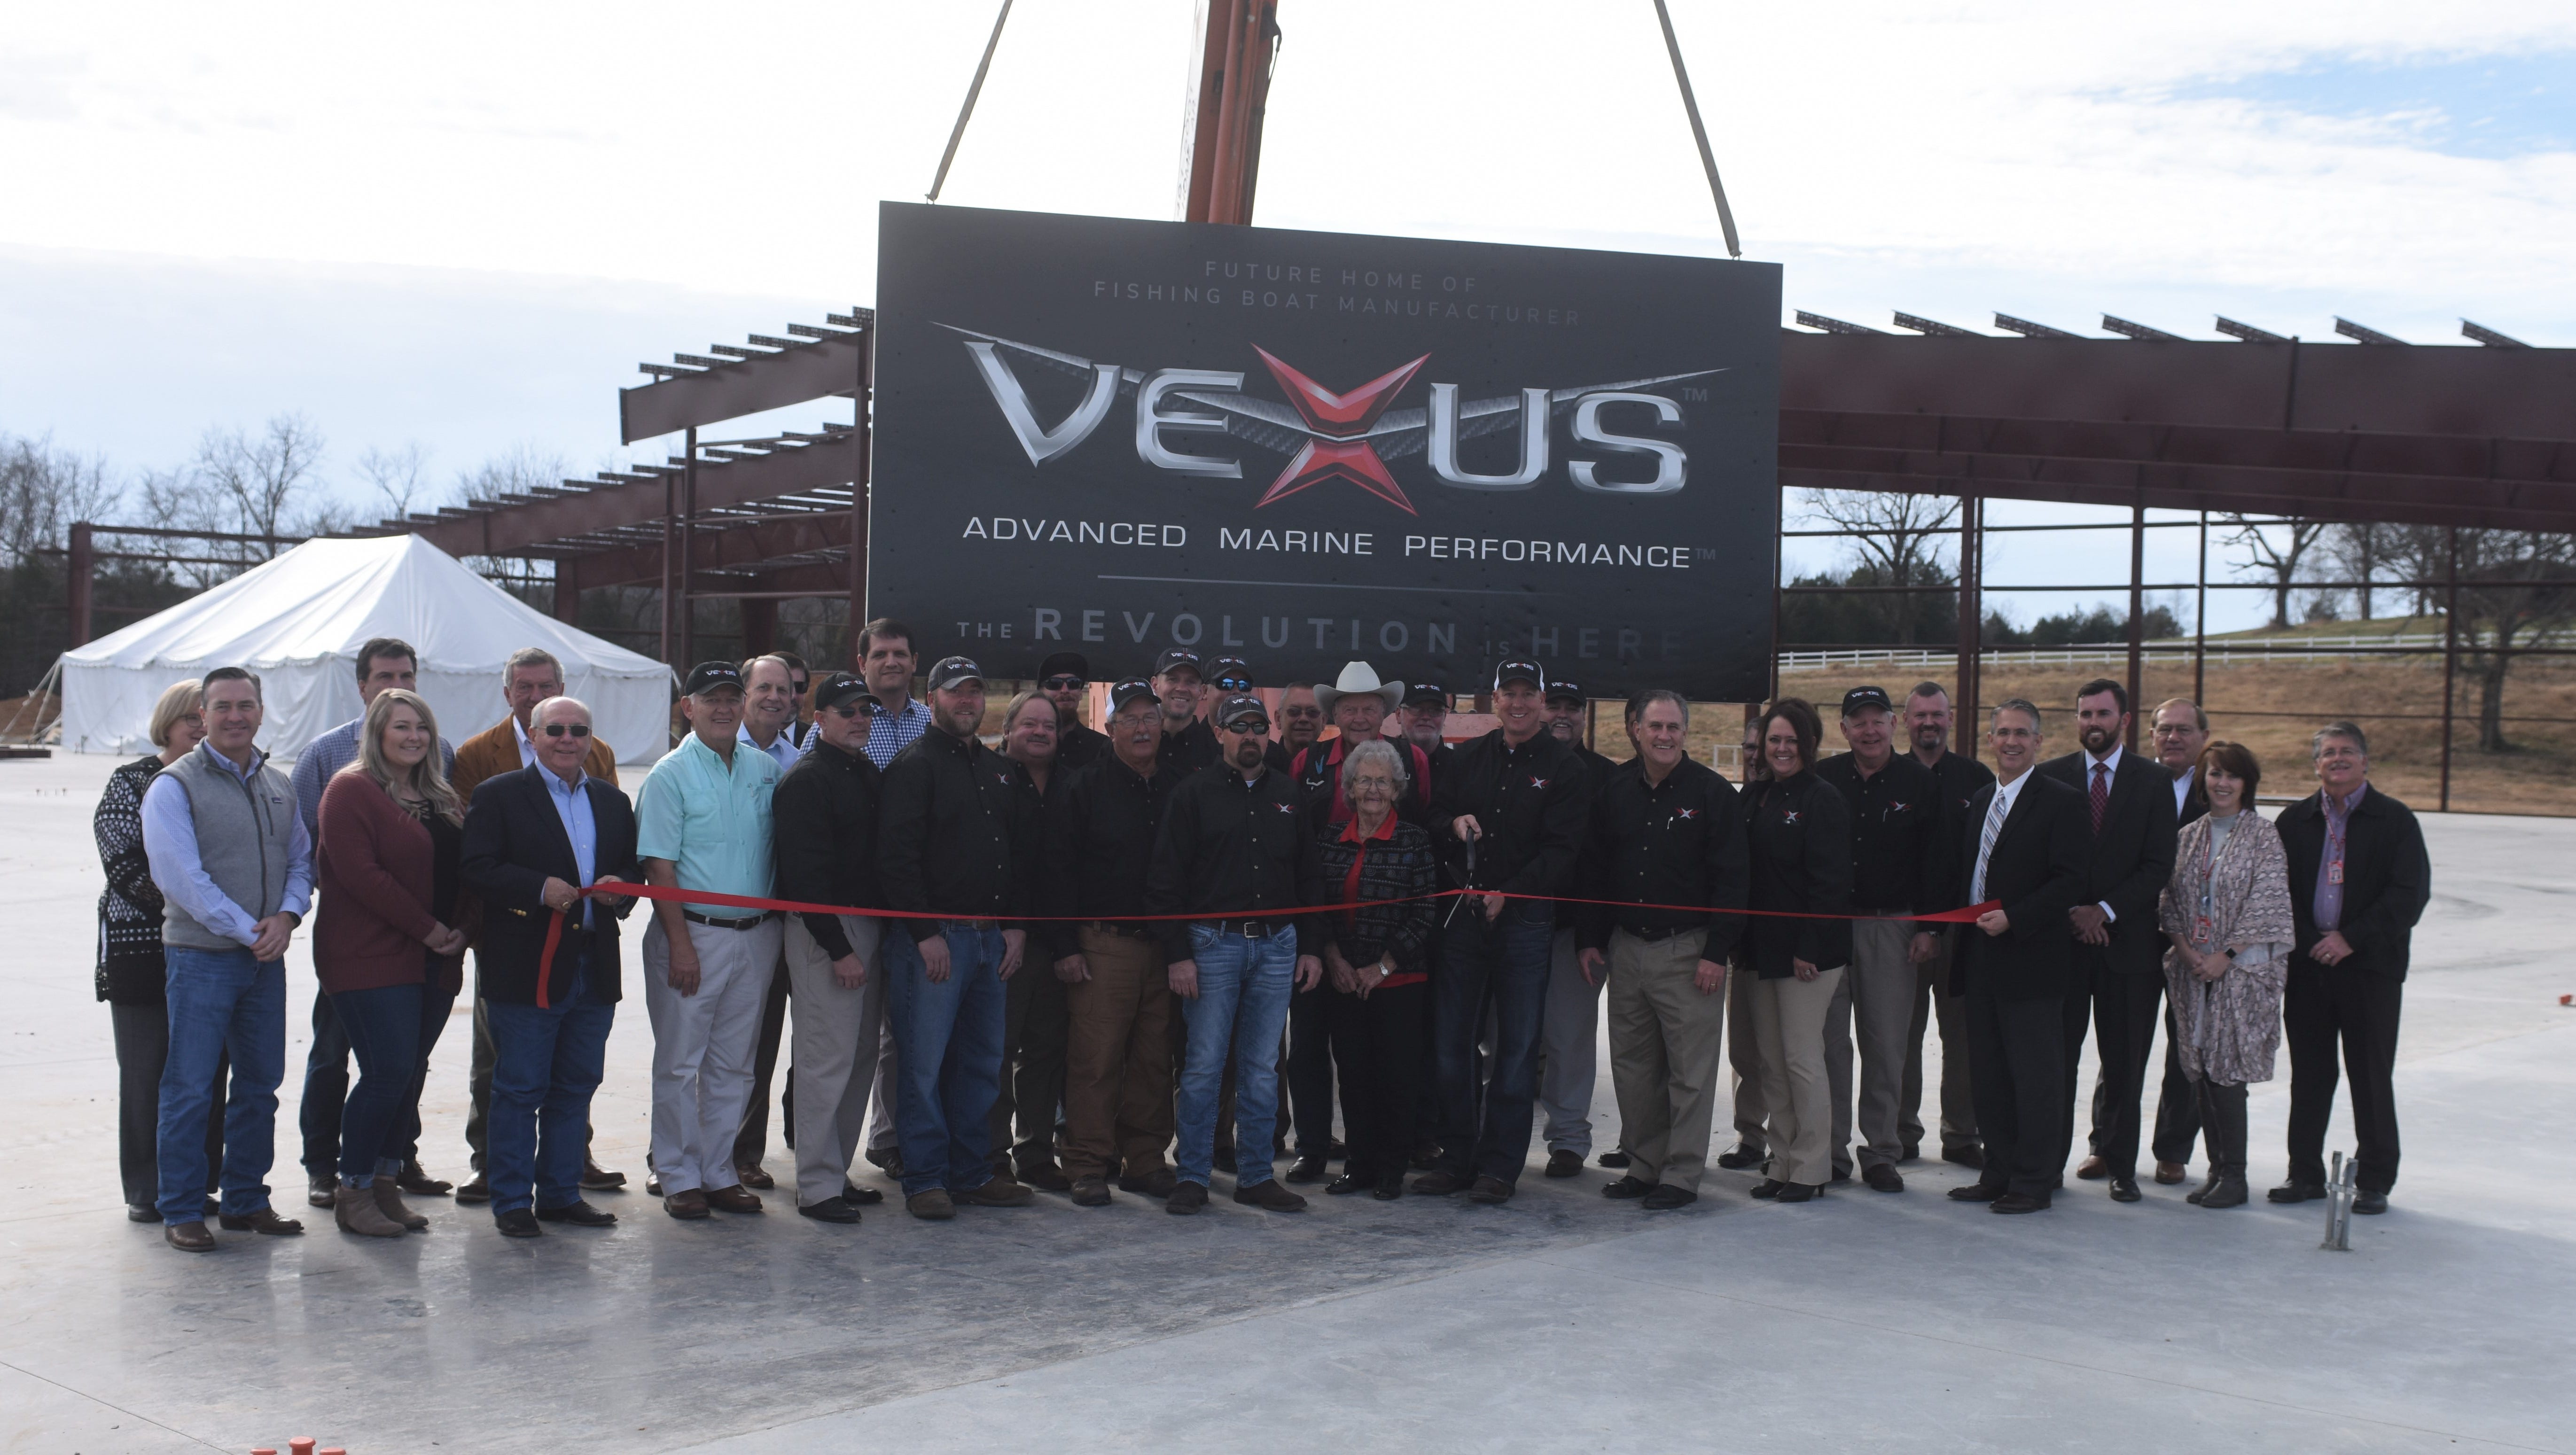 Vexus Boat employees are joined by business partners and community leaders as company president Keith Daffron cuts the ribbon on the company